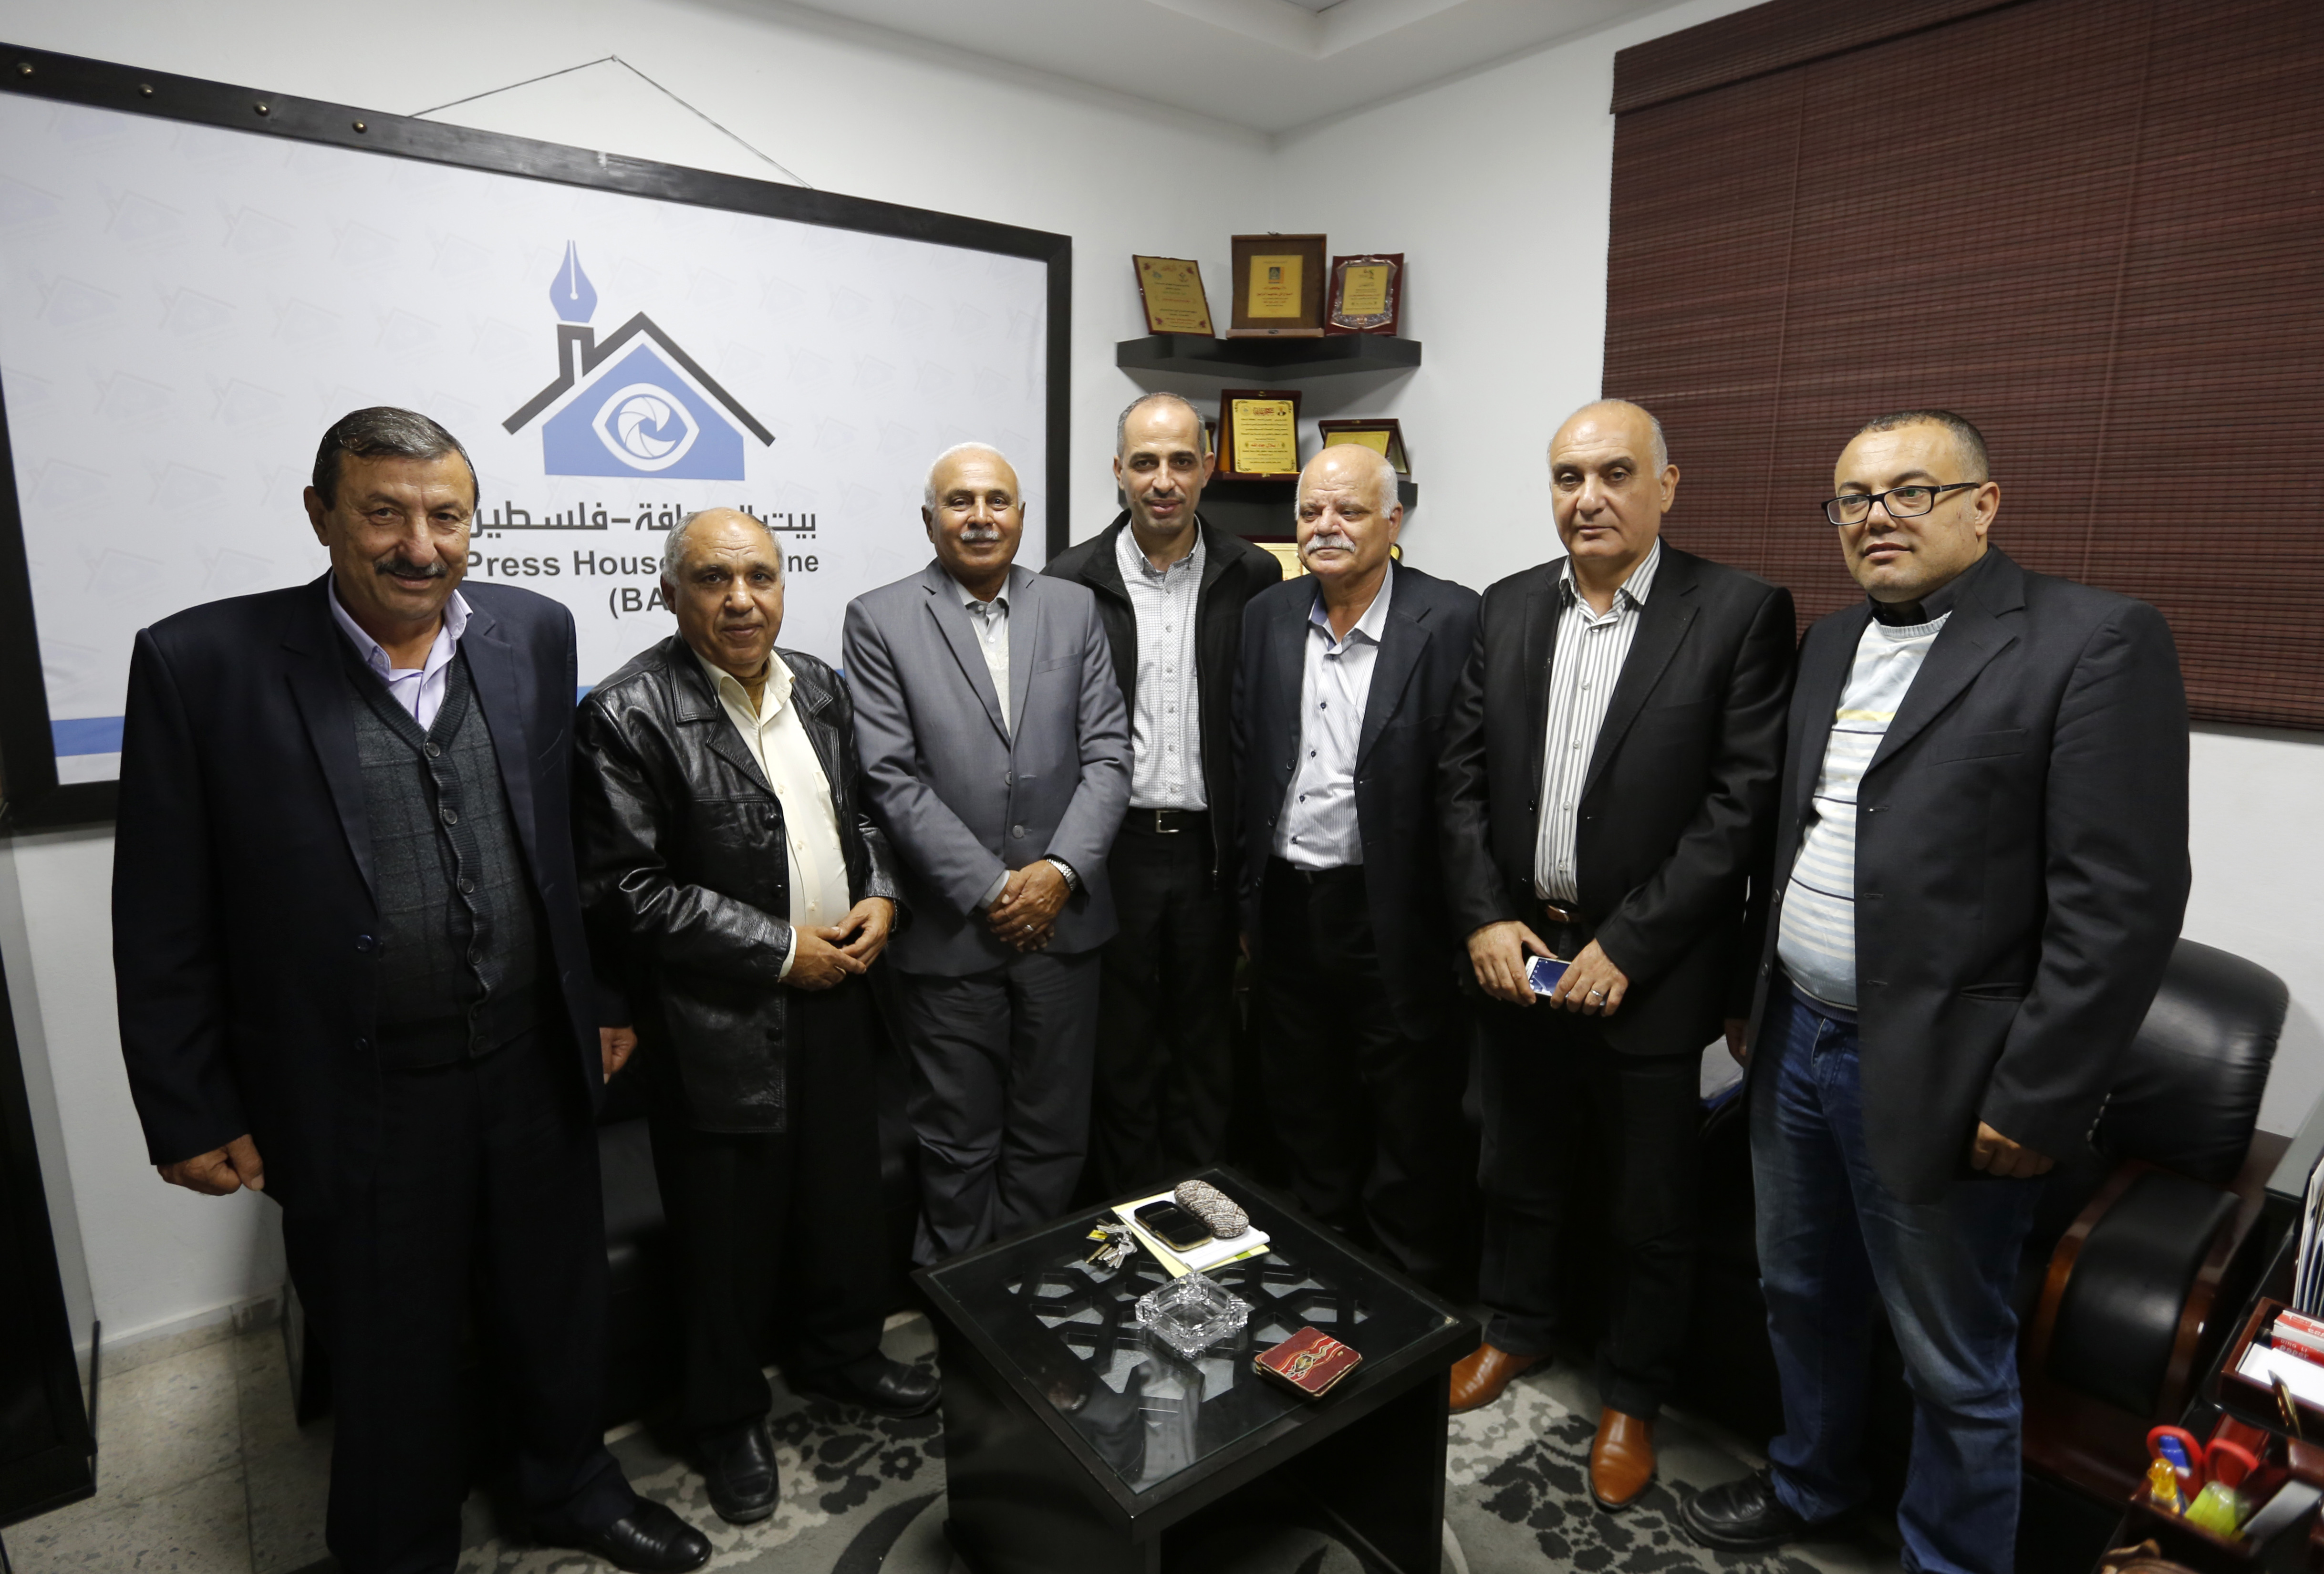 A Delegation from the National Committee for Retired Visits the Press House